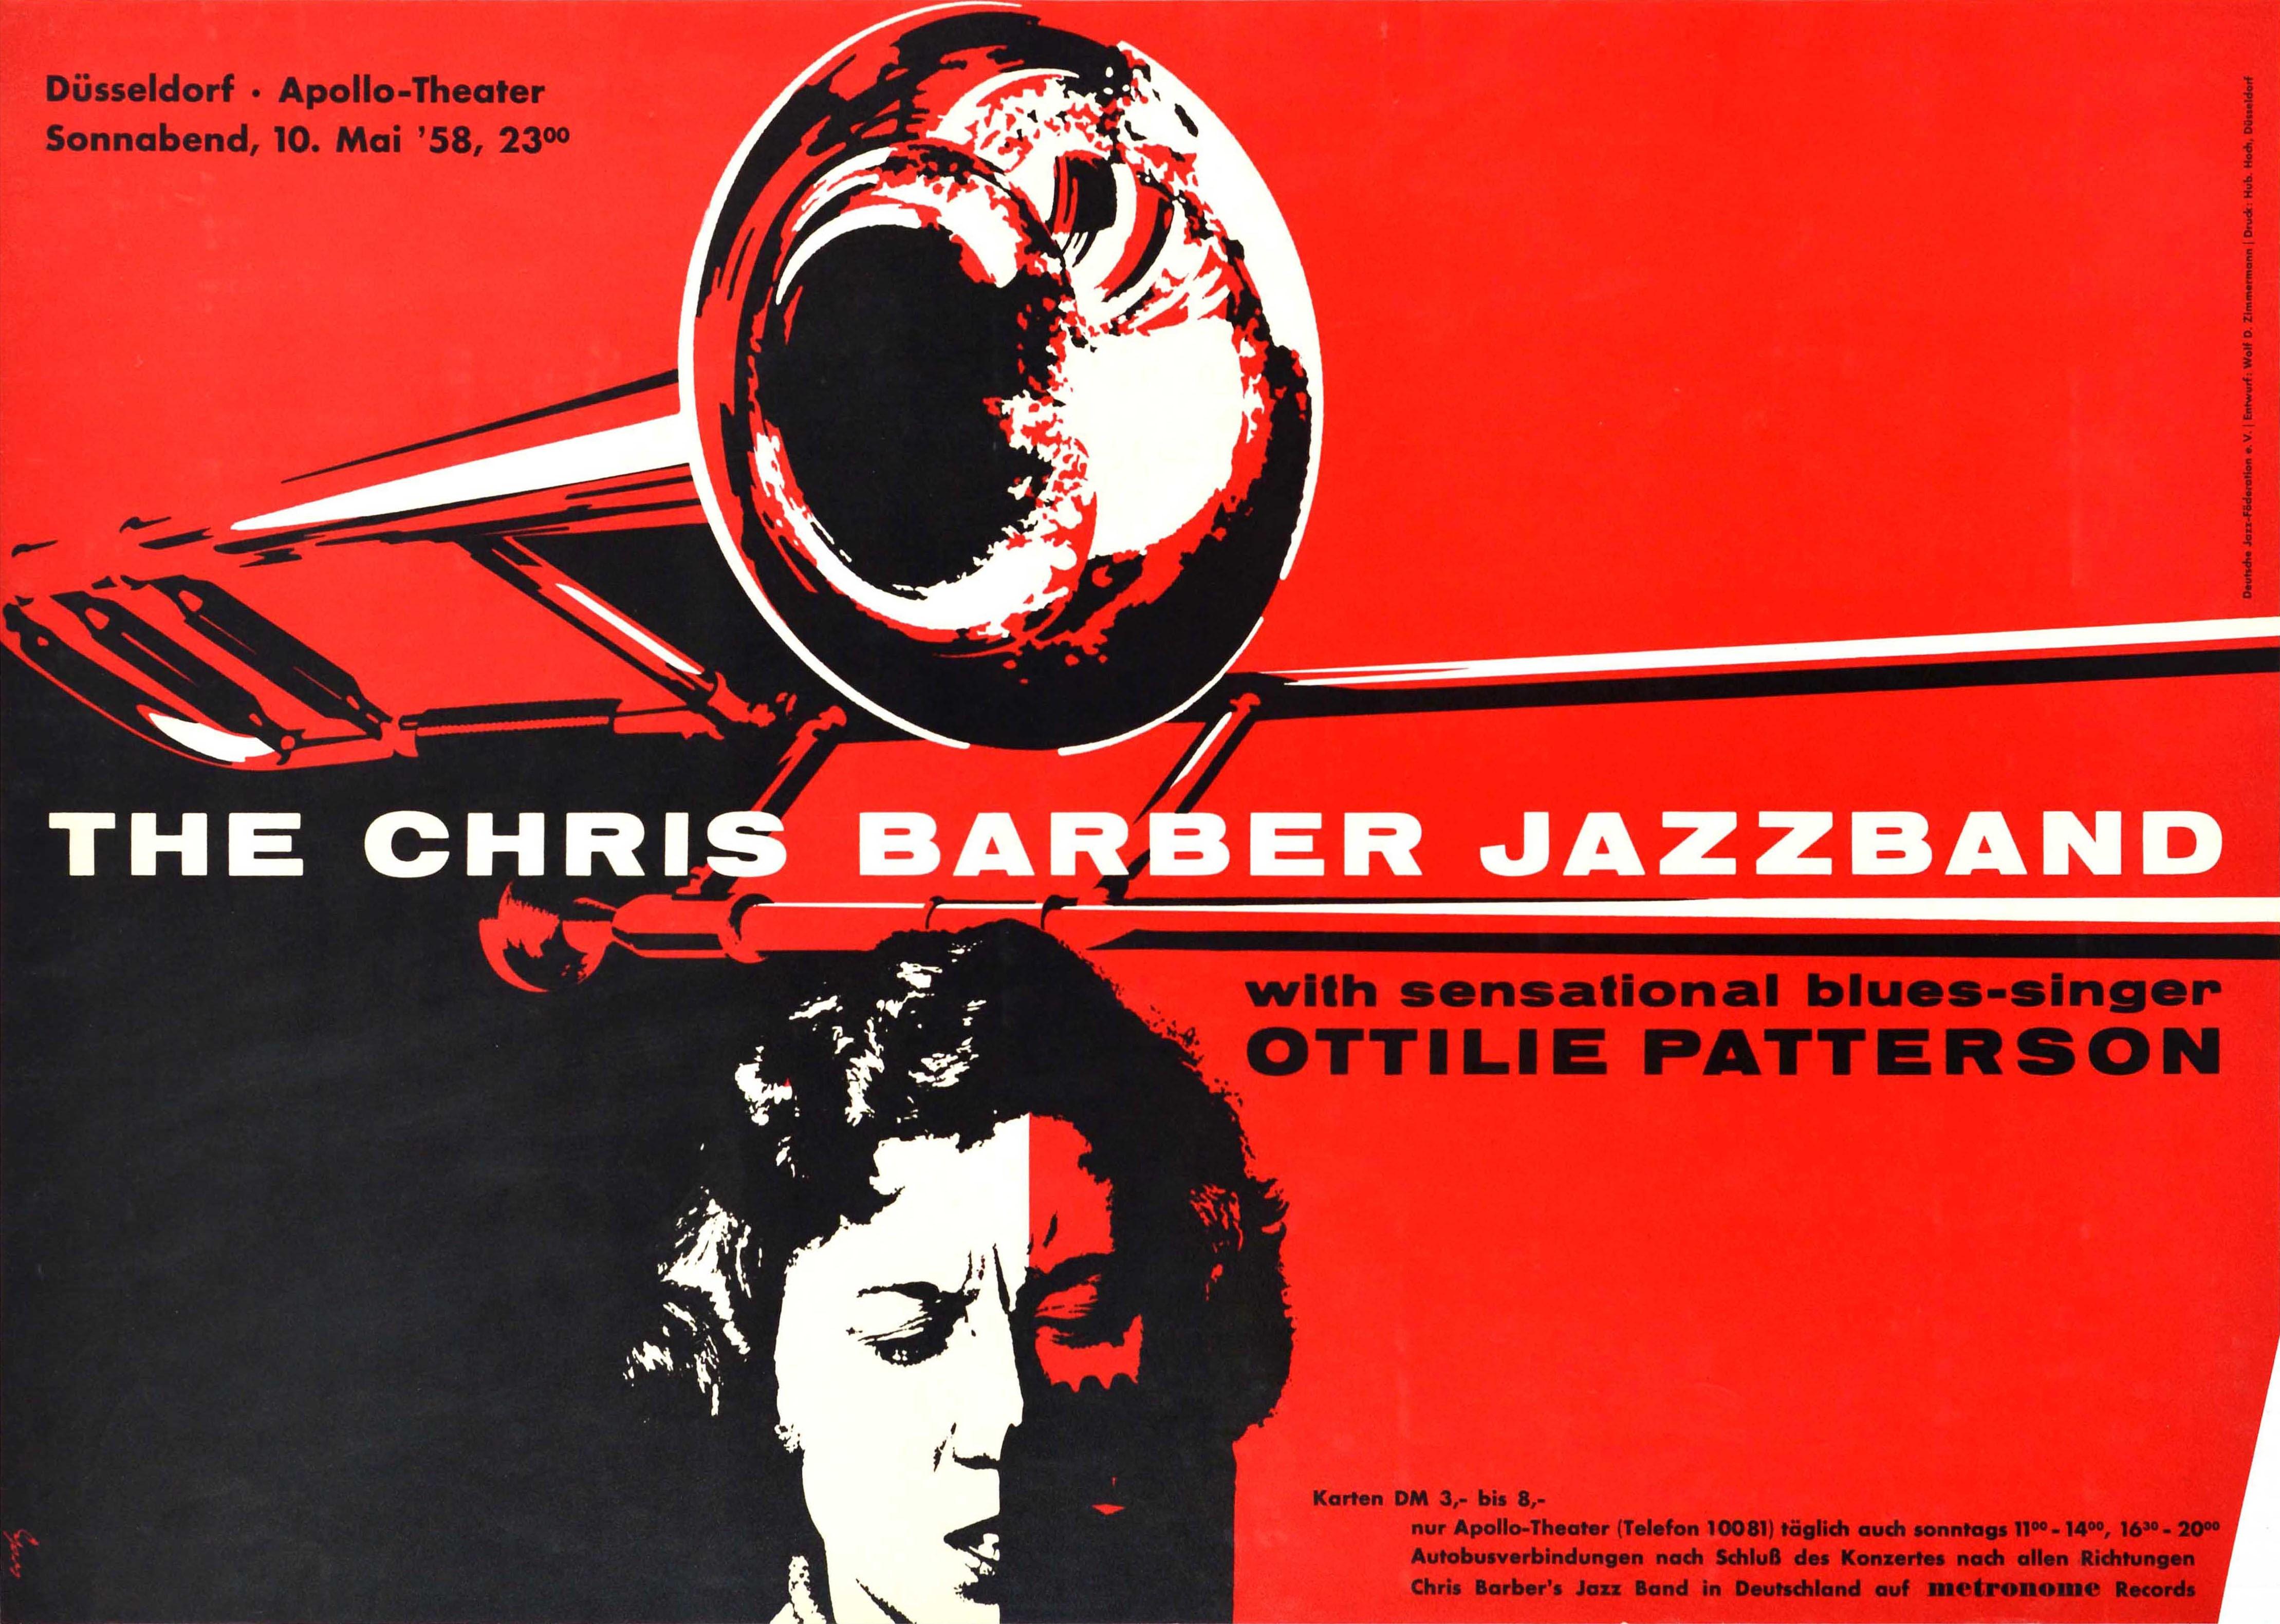 Original vintage advertising poster for a music concert featuring The Chris Barber Jazzband with sensational blues singer Ottilie Patterson at the Dusseldorf Apollo Theatre on 10 May 1958. Great design depicting an image of the Northern Irish blues